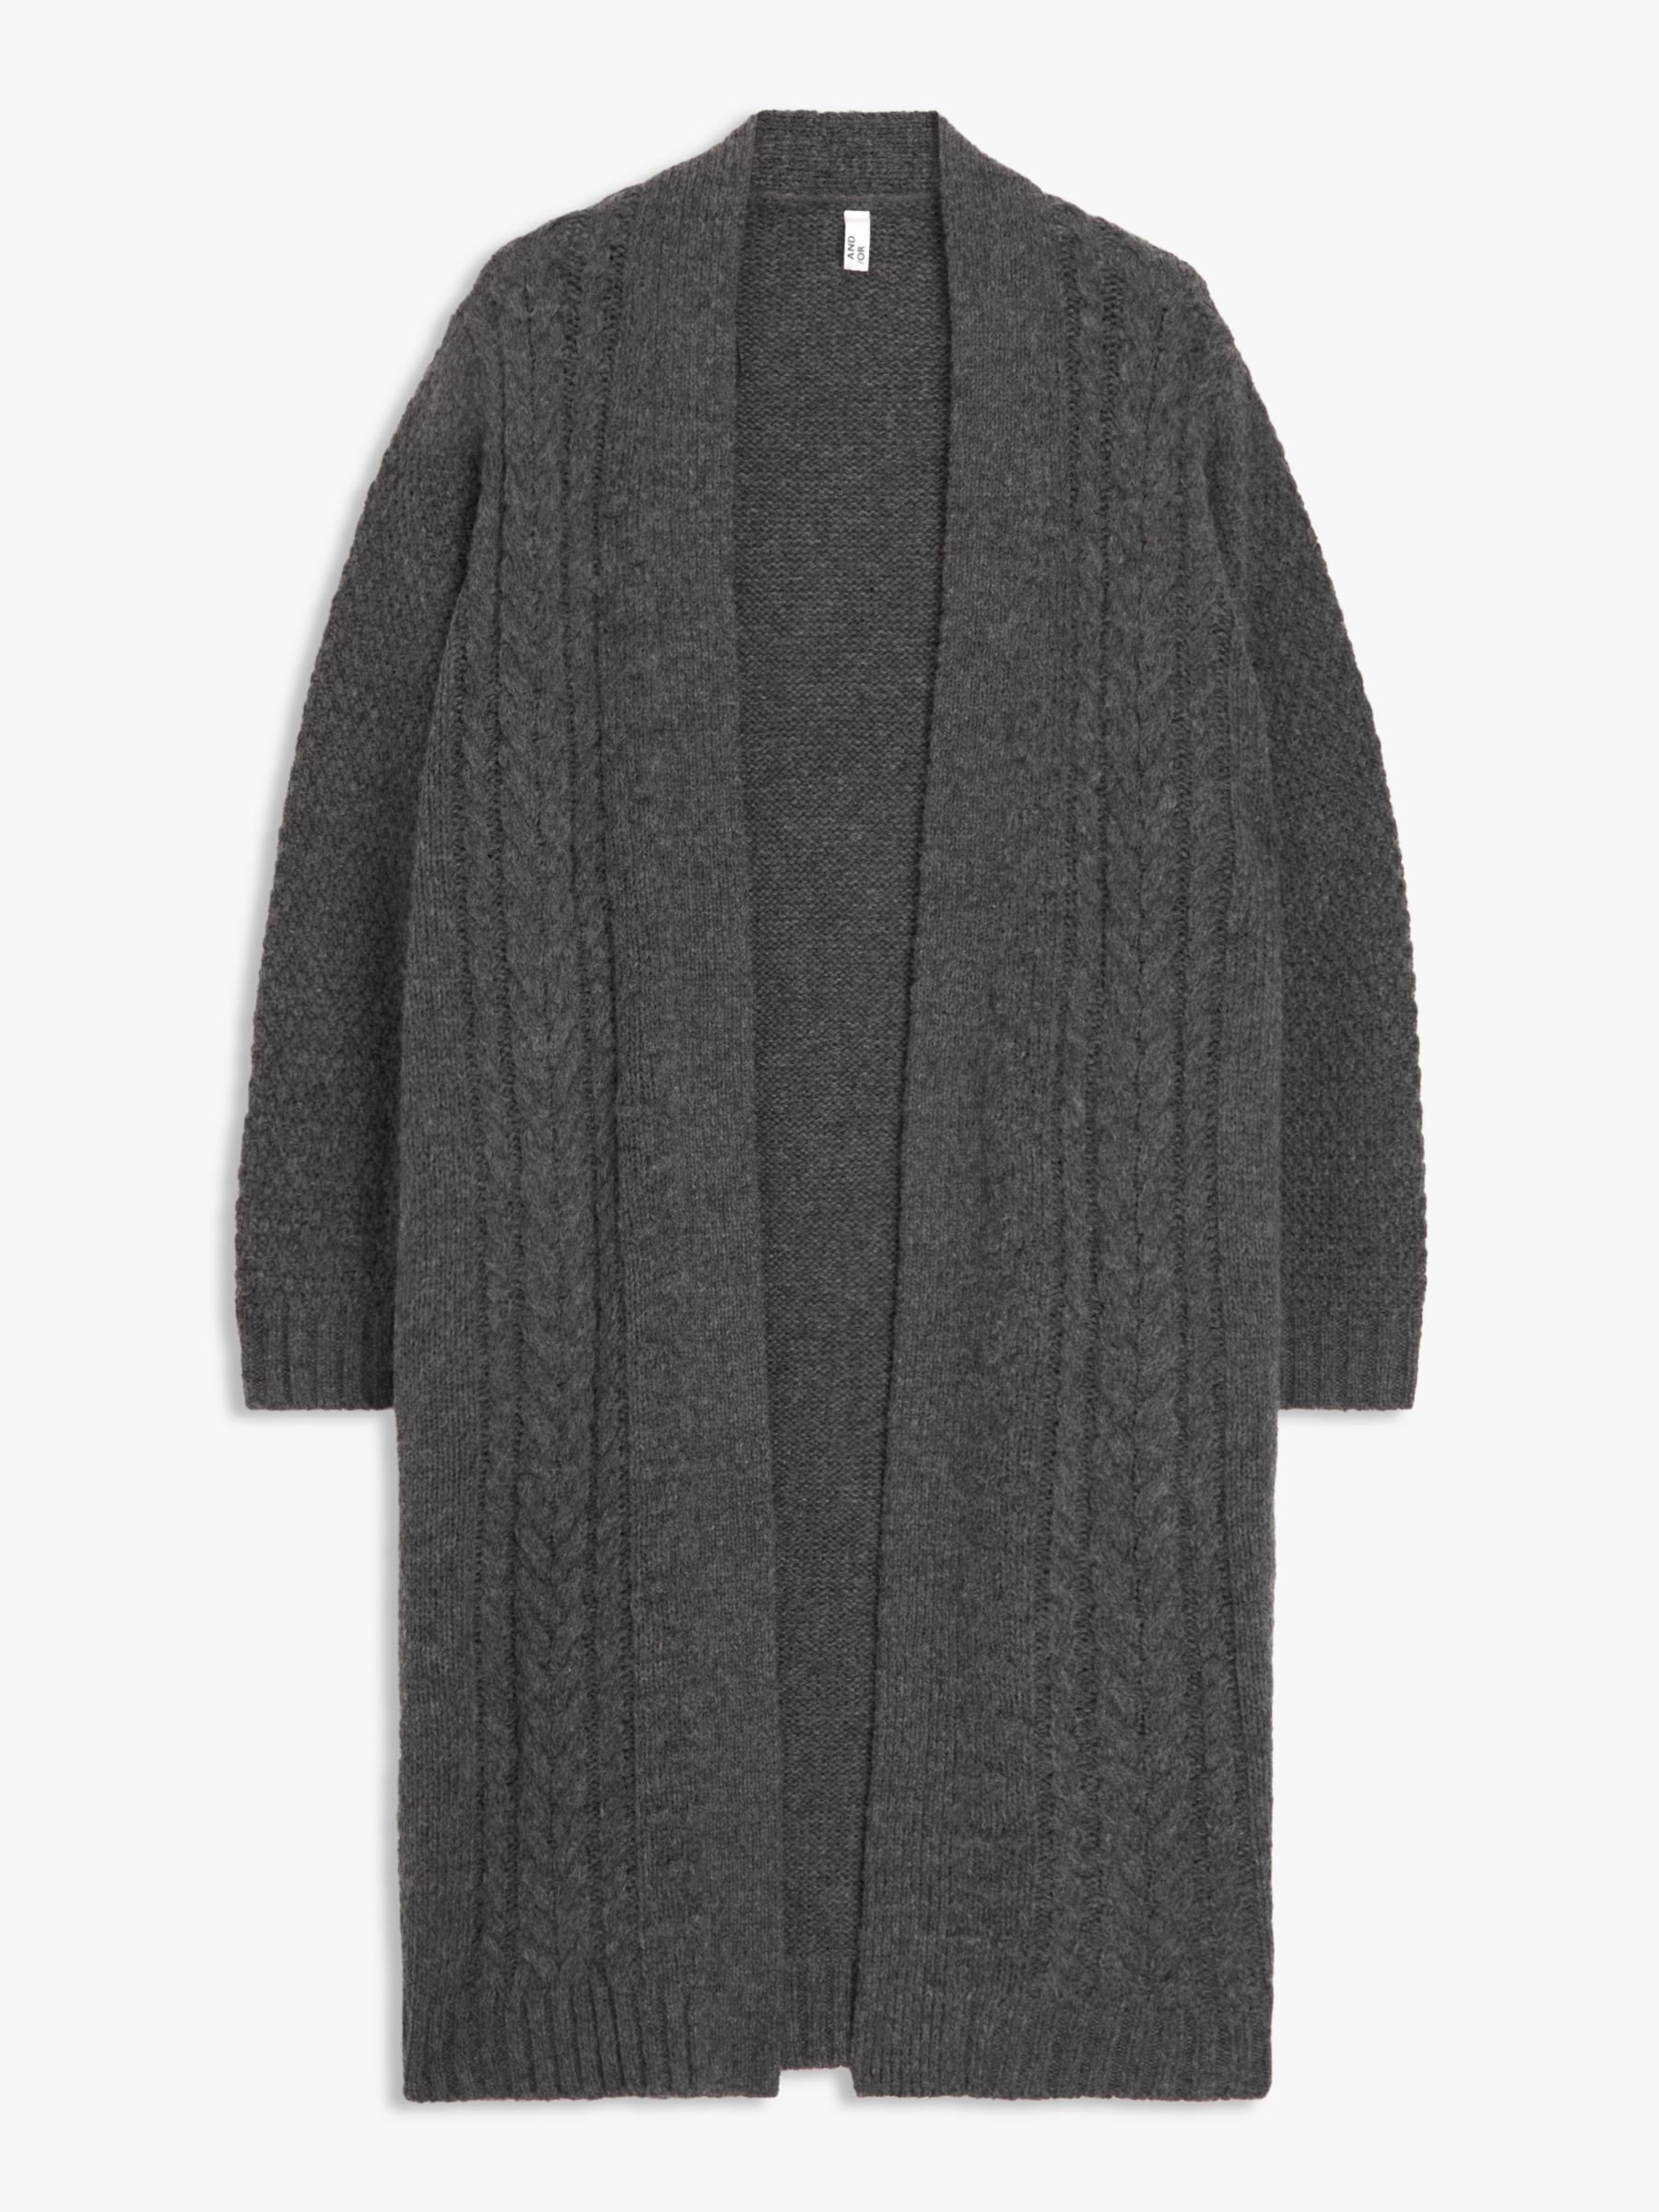 AND/OR Indiana Plain Textured Longline Cardigan, Grey Marl, XS